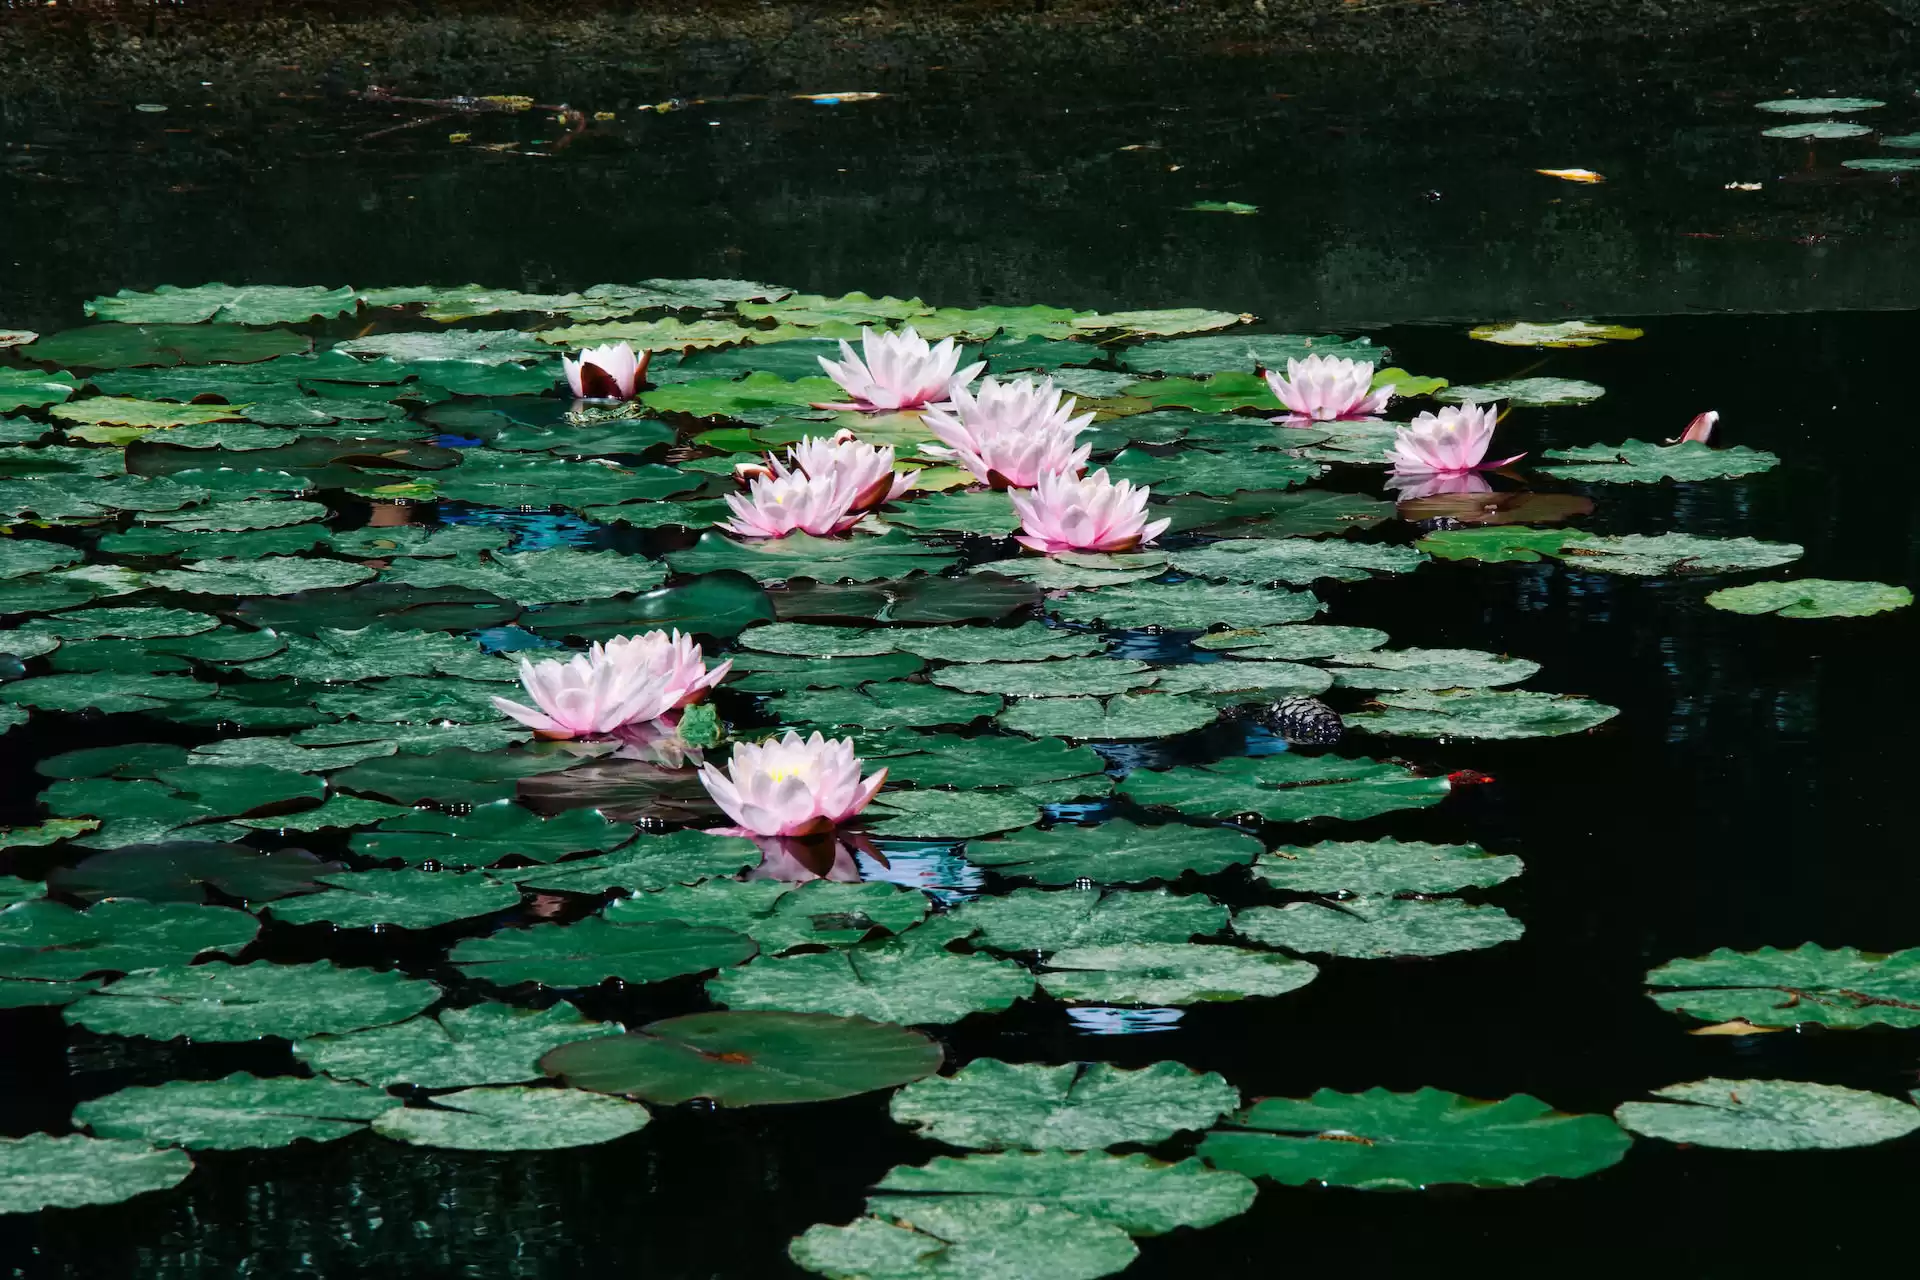 Aquatic plants floating on the surface of a koi pond